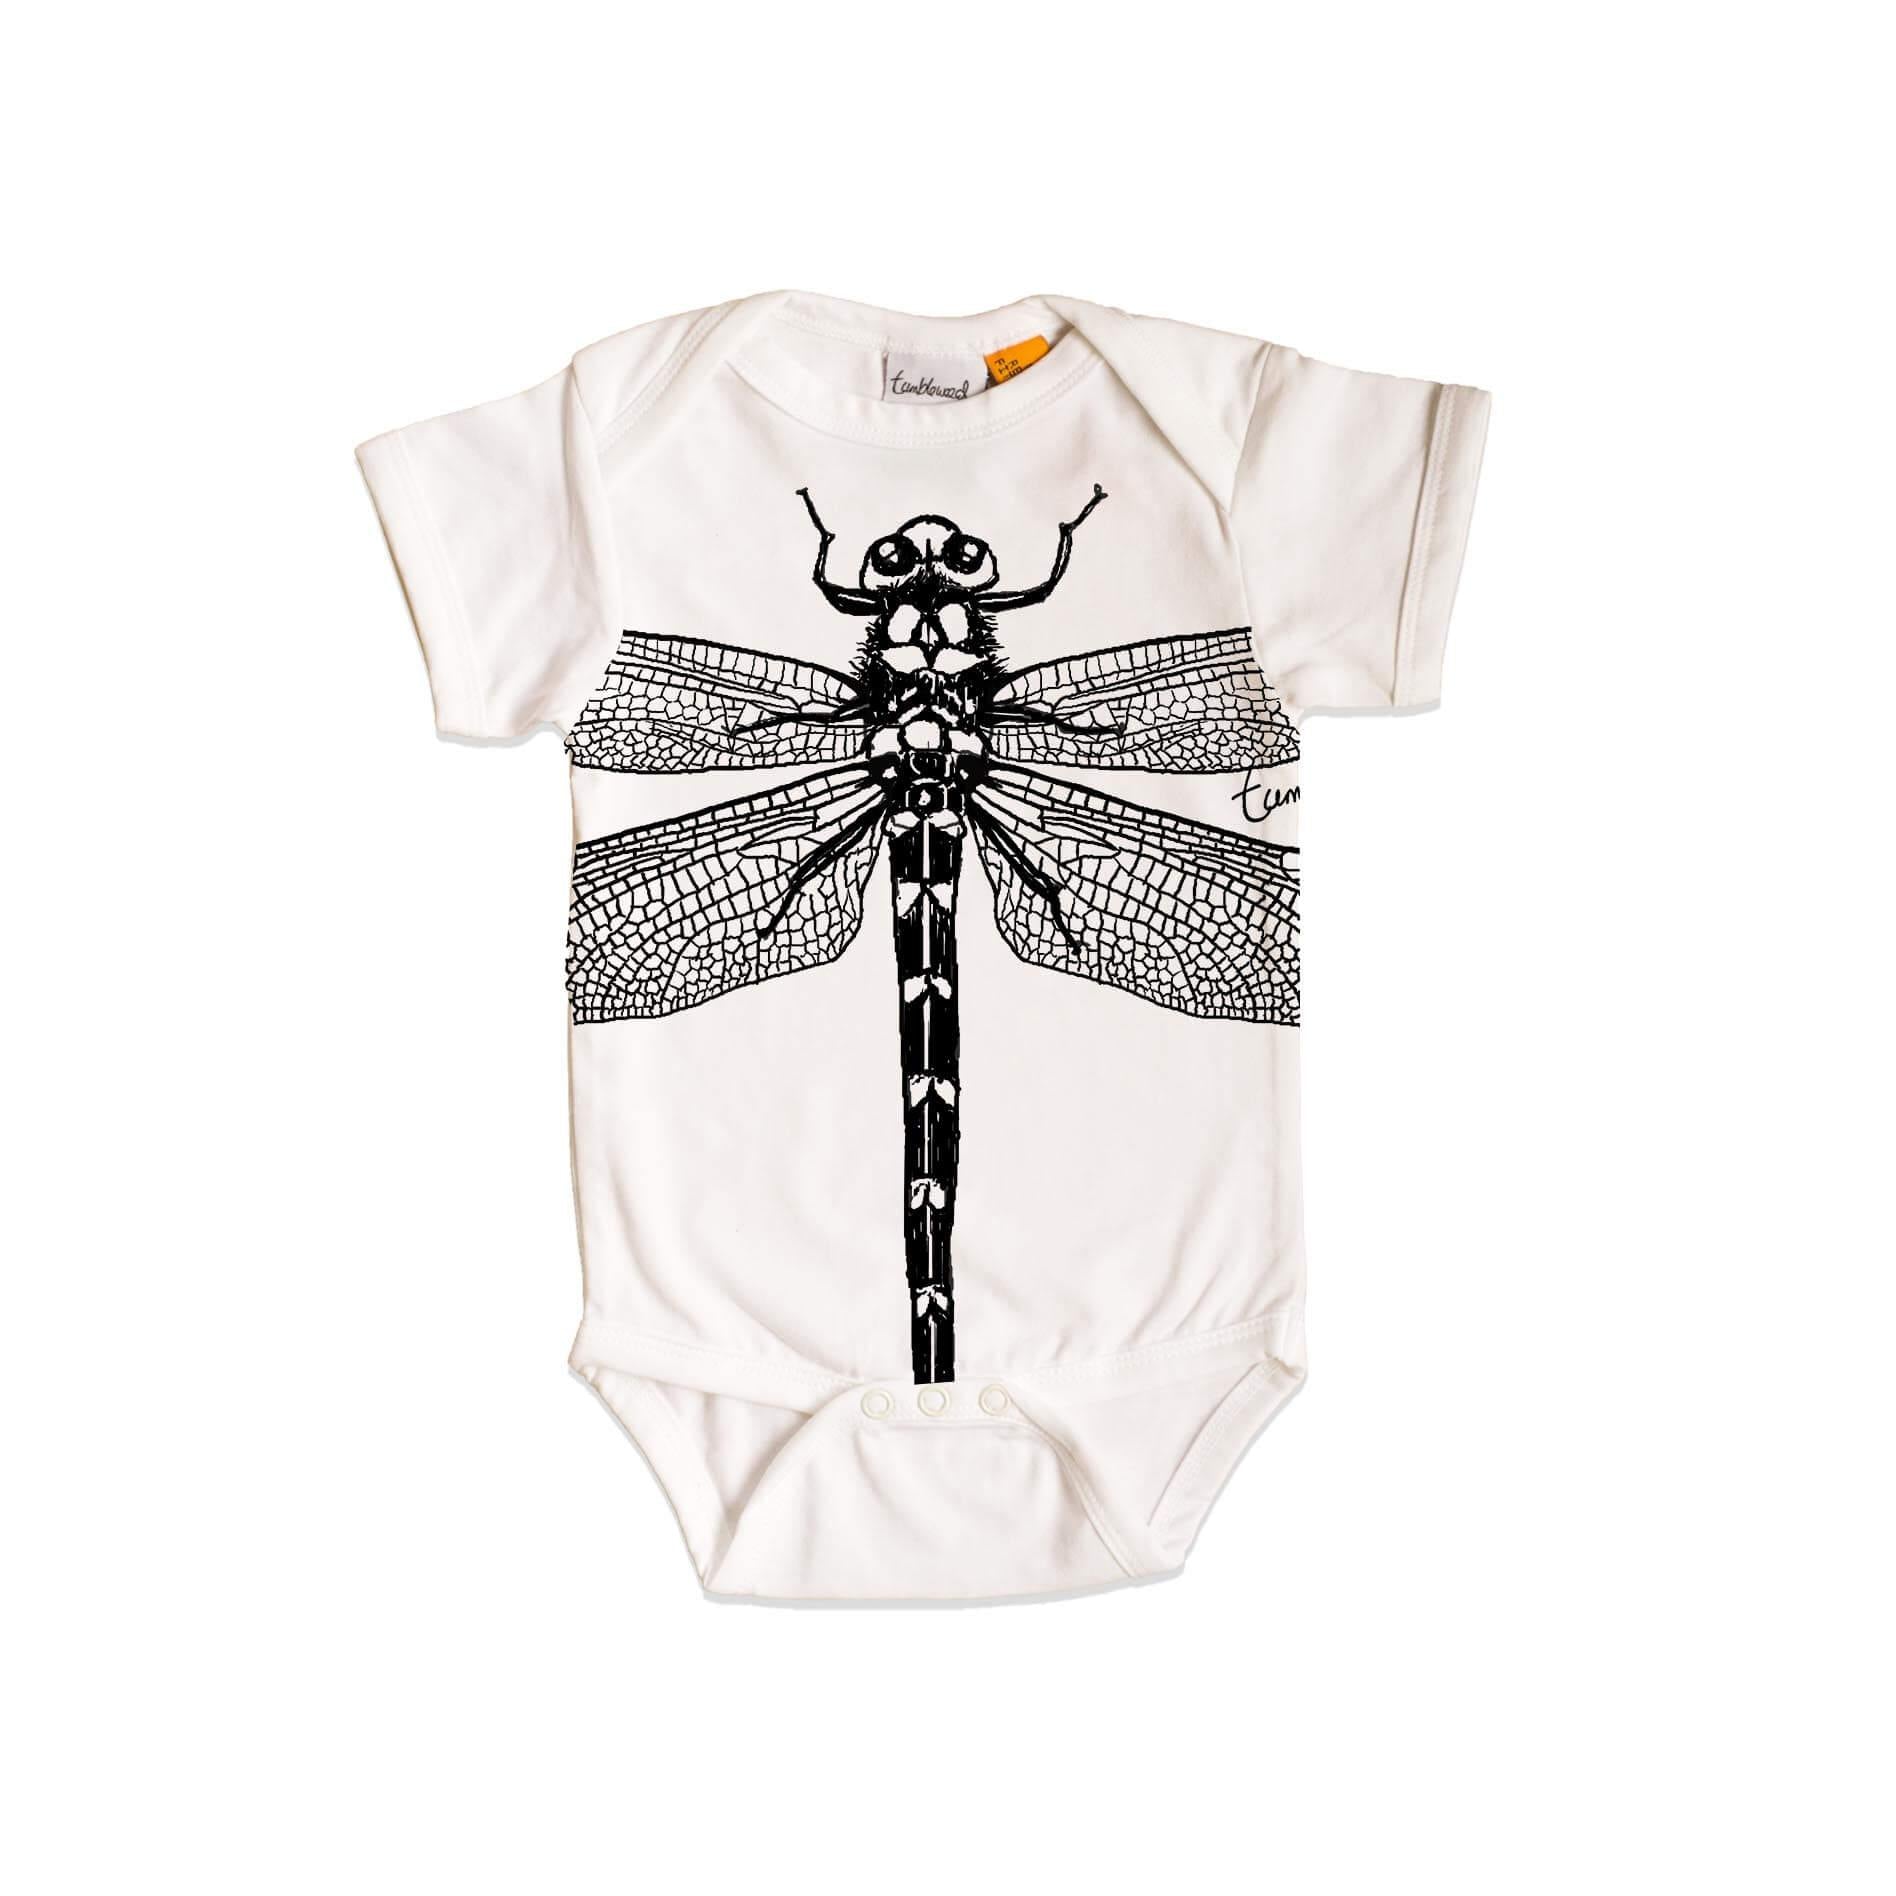 Short sleeved, white, organic cotton, baby onesie featuring a screen printed Dragonfly design.